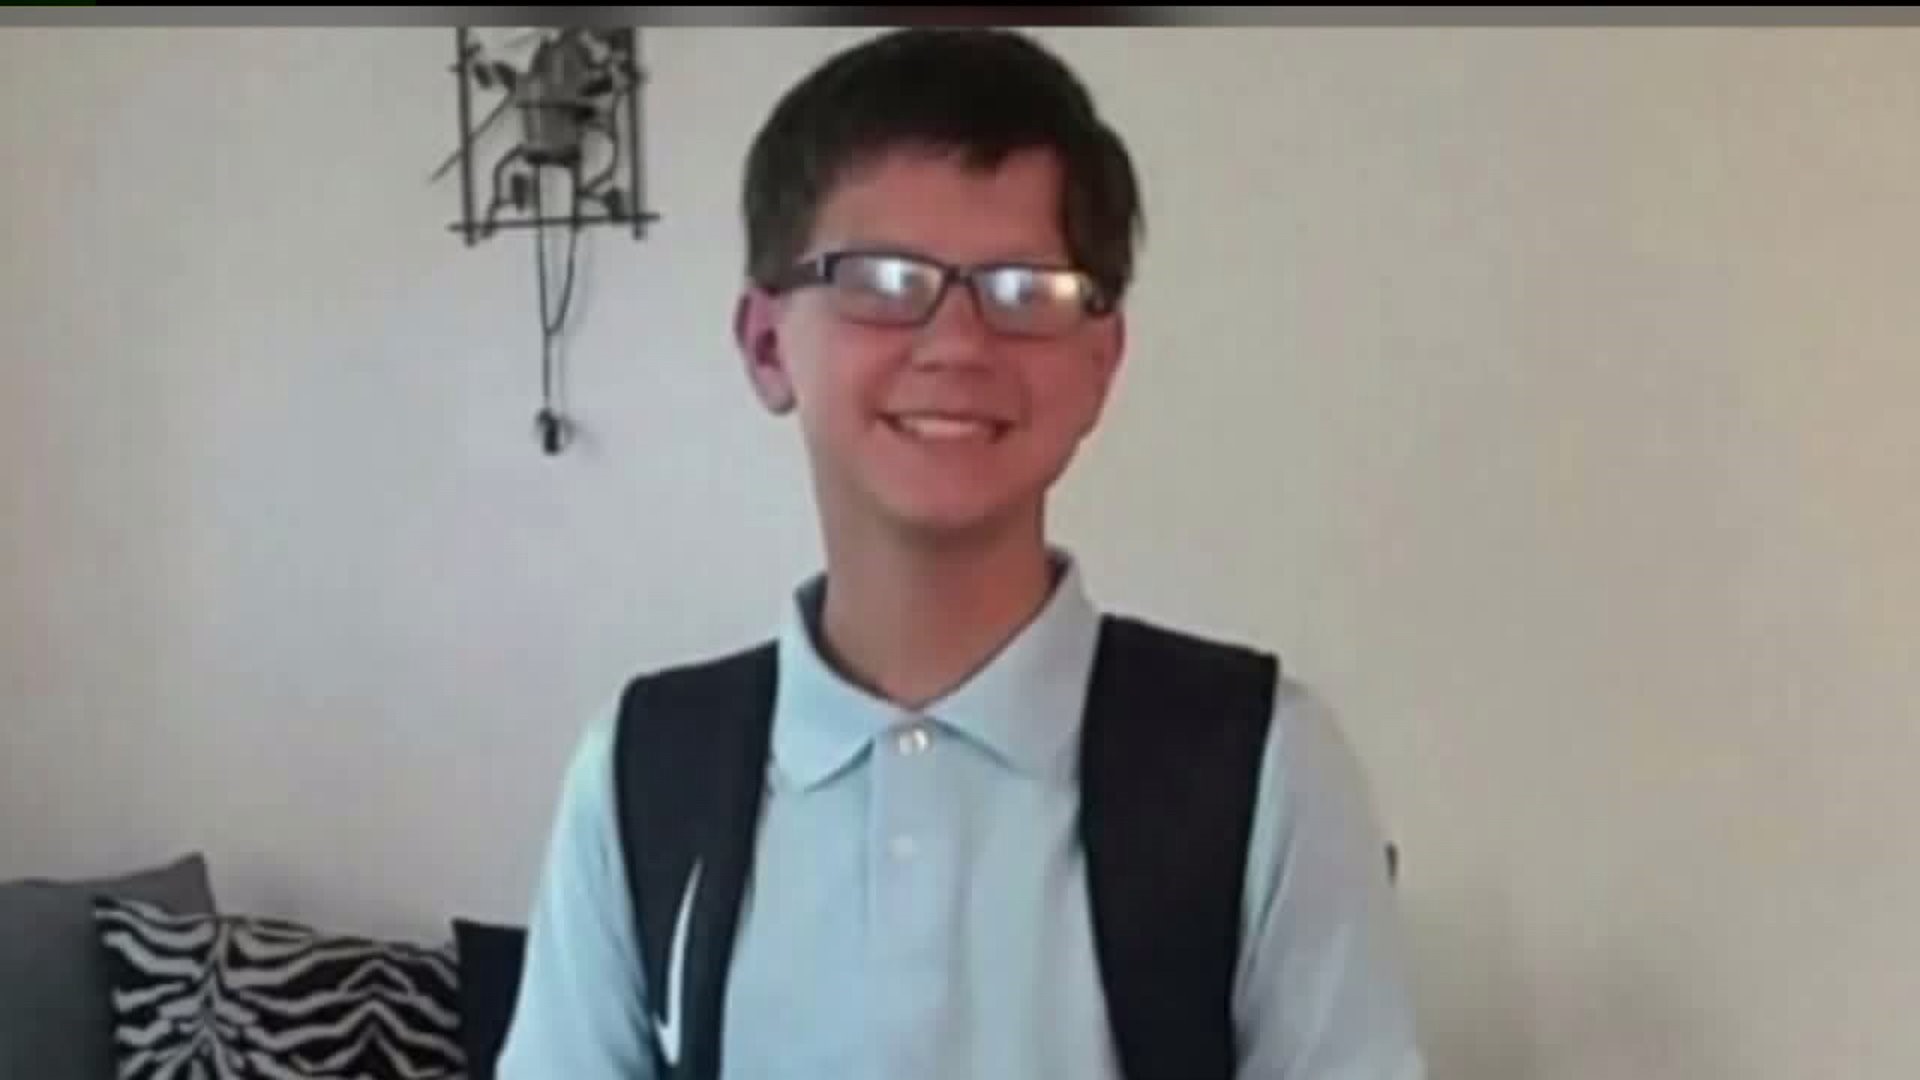 Relatives, School Community Mourning Loss of 13-Year-Old Boy to Fire